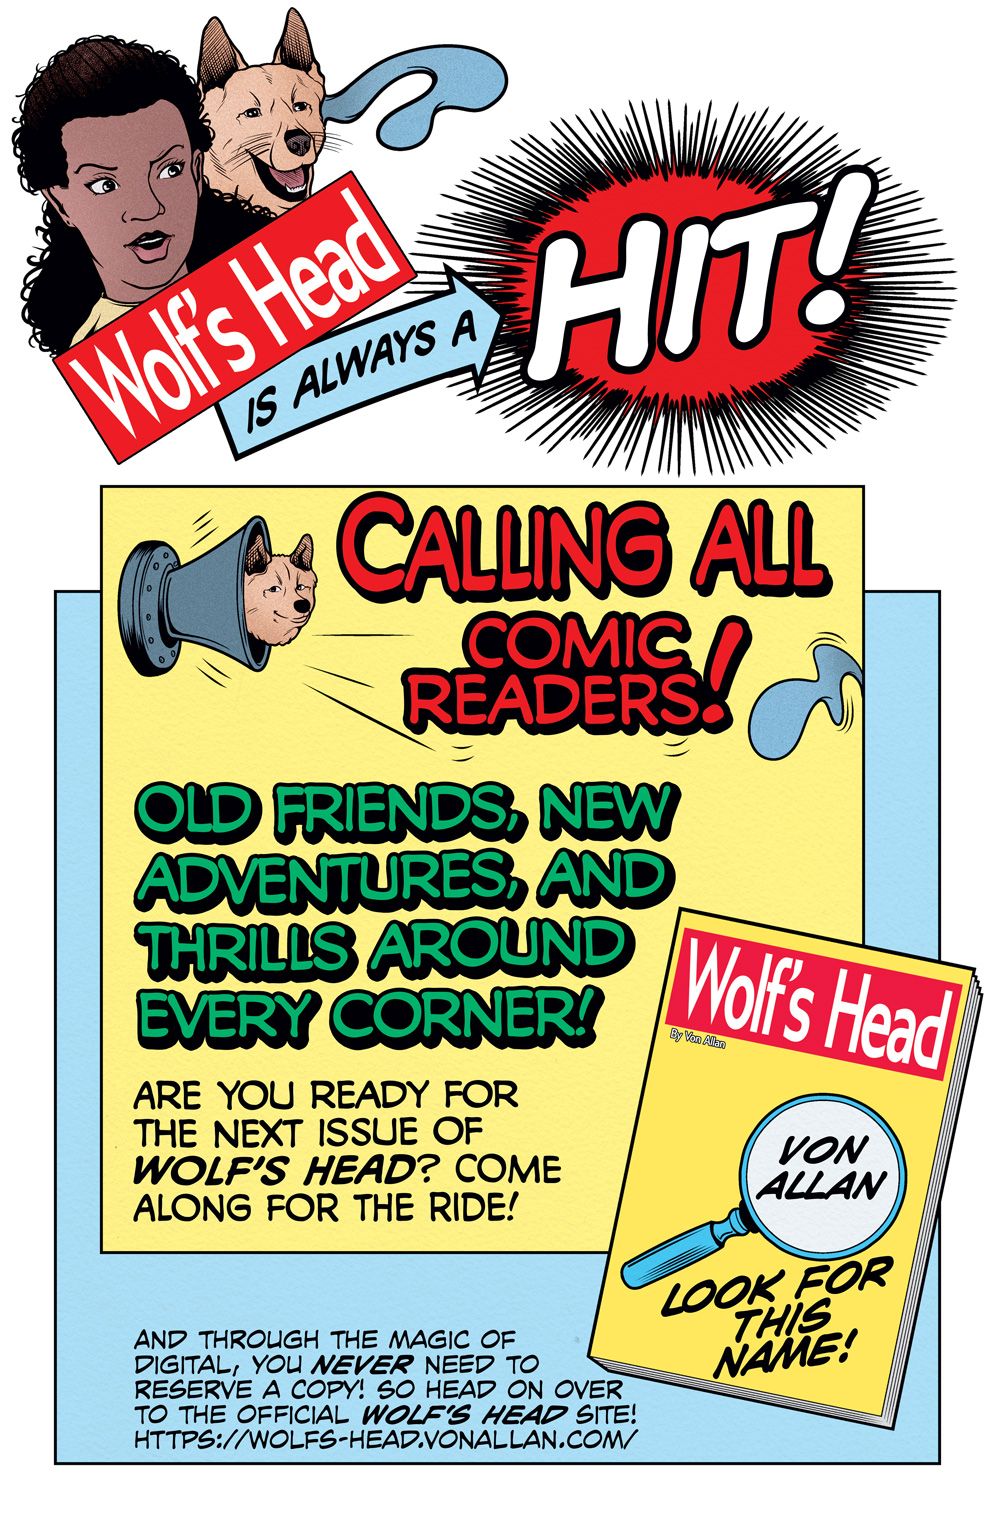 A fun little teaser announcing the next issue of WOLF'S HEAD